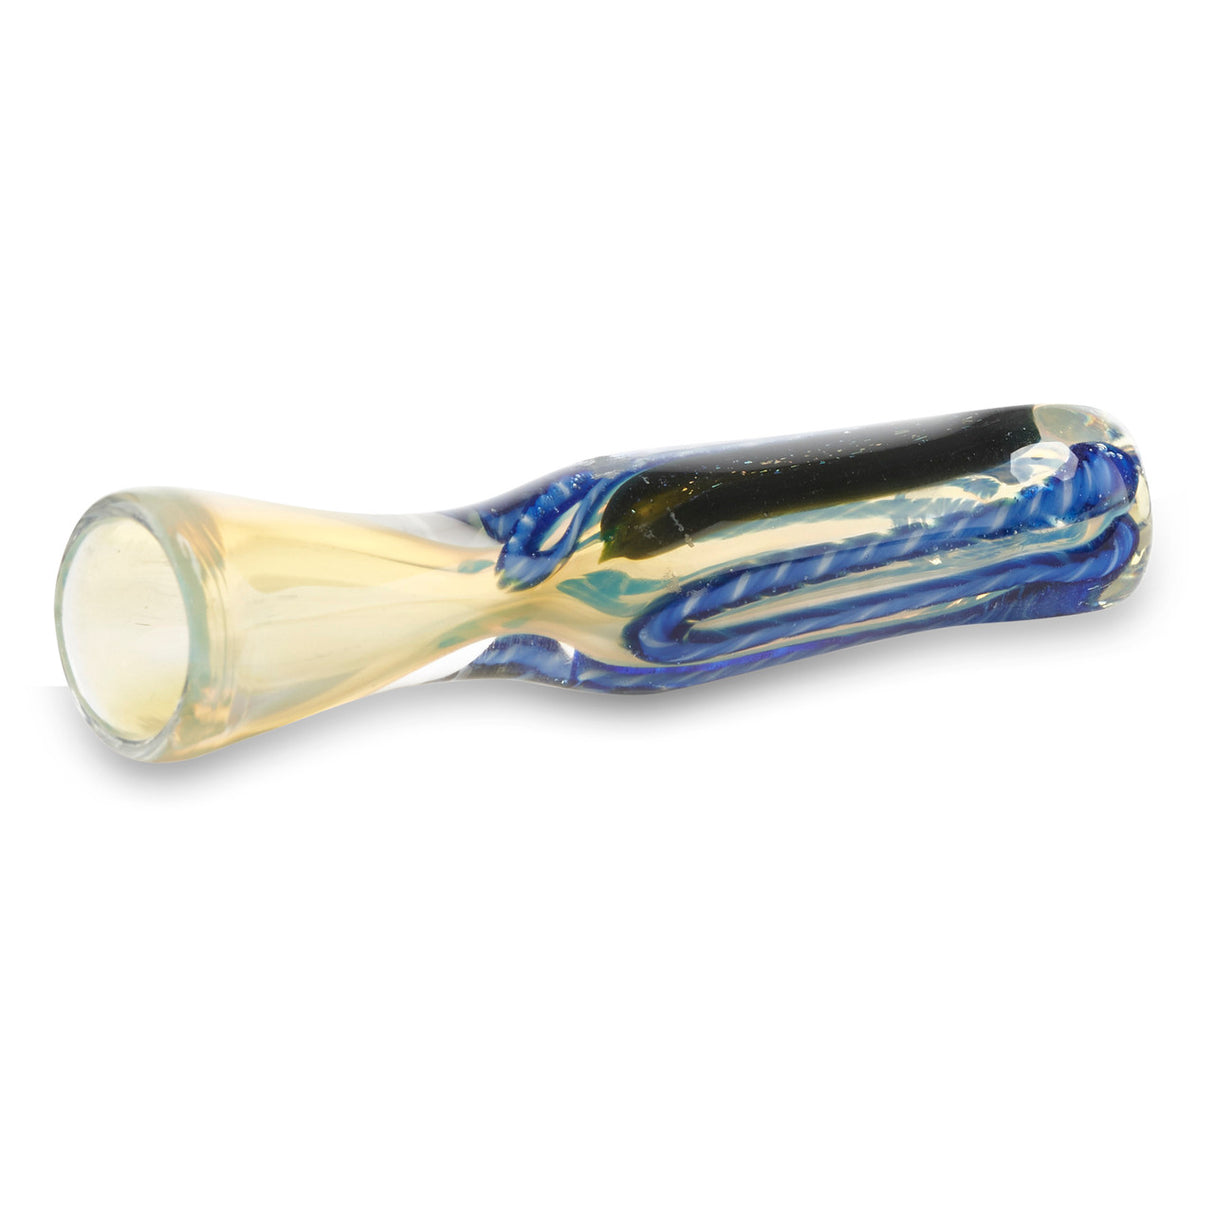 dope glass chillum for cheap online